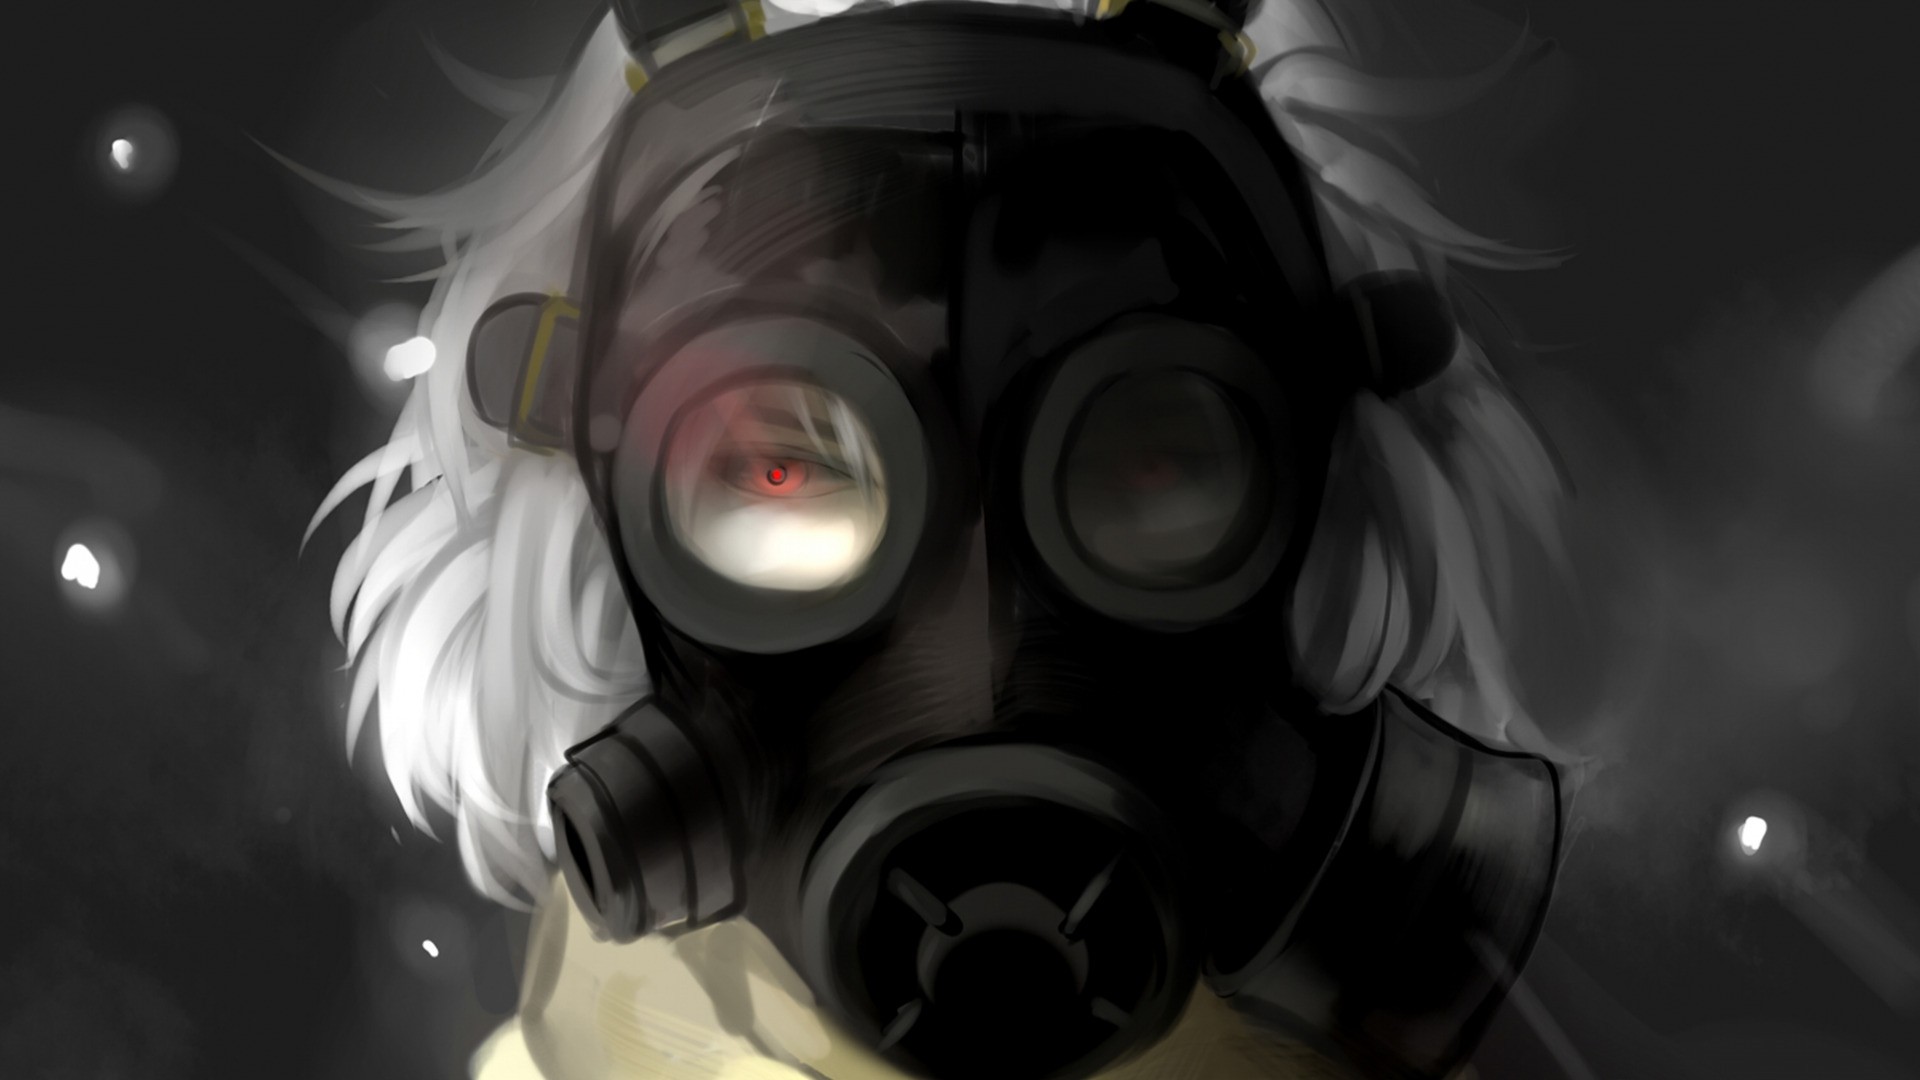 Anime Girl with Gas Mask Wallpaper